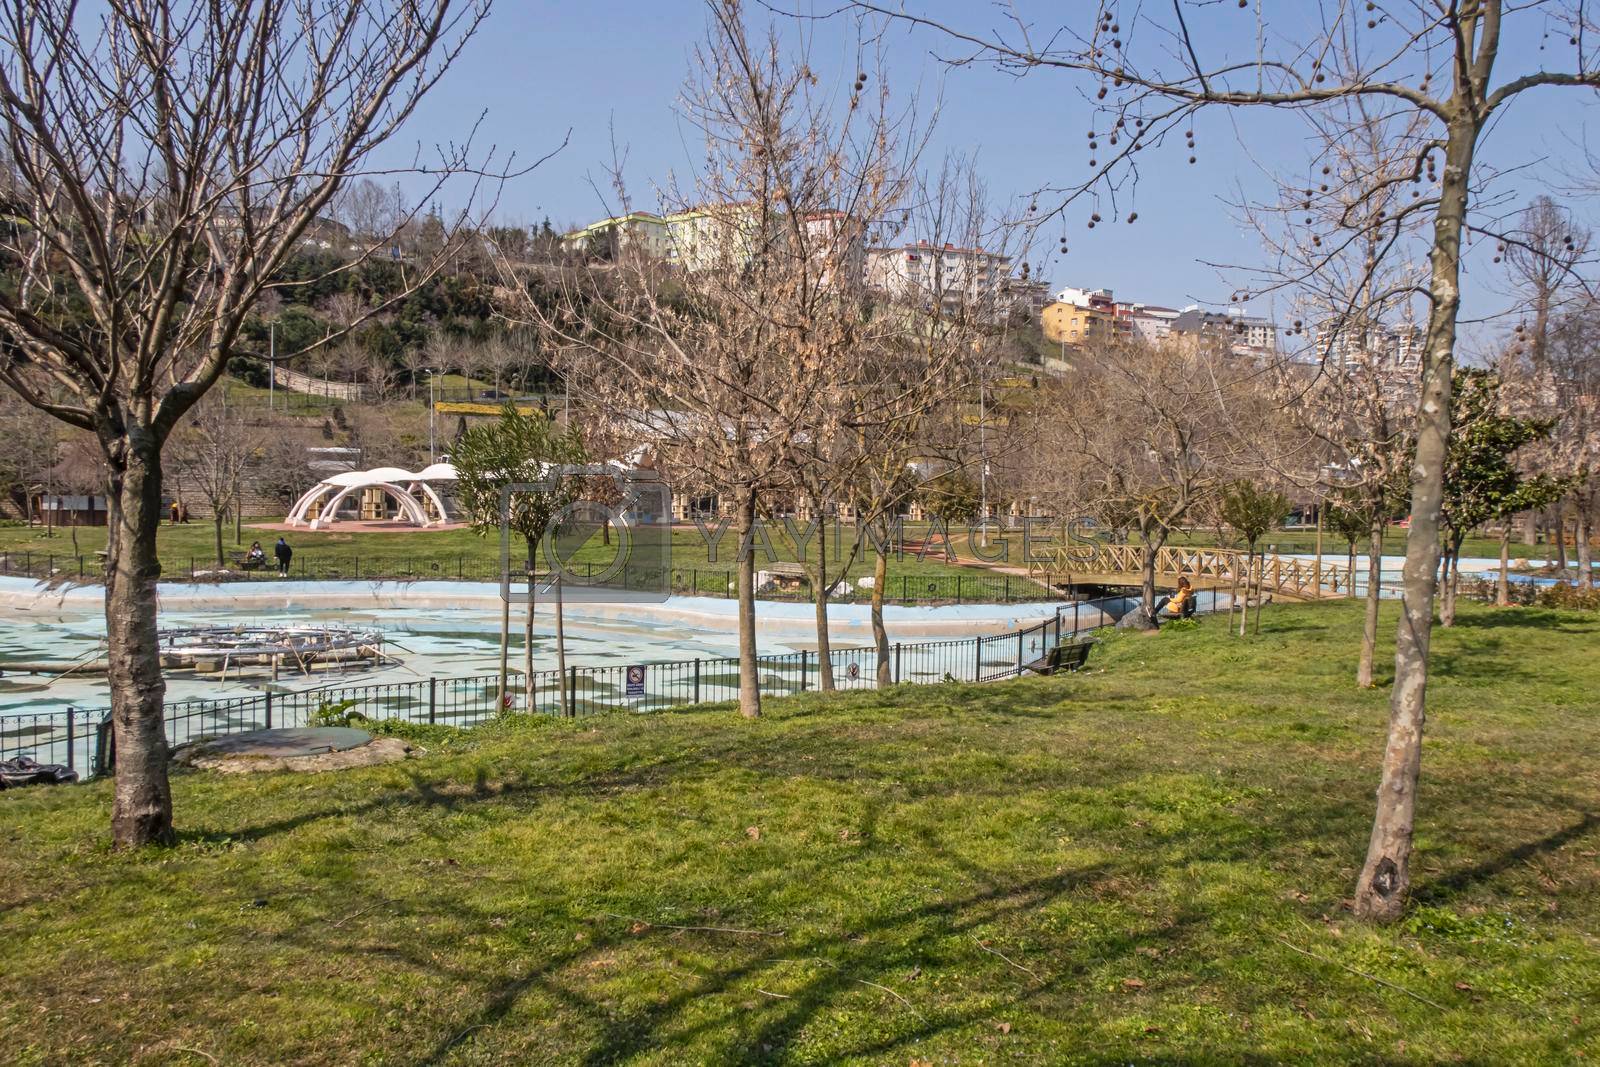 Kagithane,istanbul,Turkey-March 25,2022.Kagithane district on the shore of the Golden Horn with its green parks, historical and modern buildings.